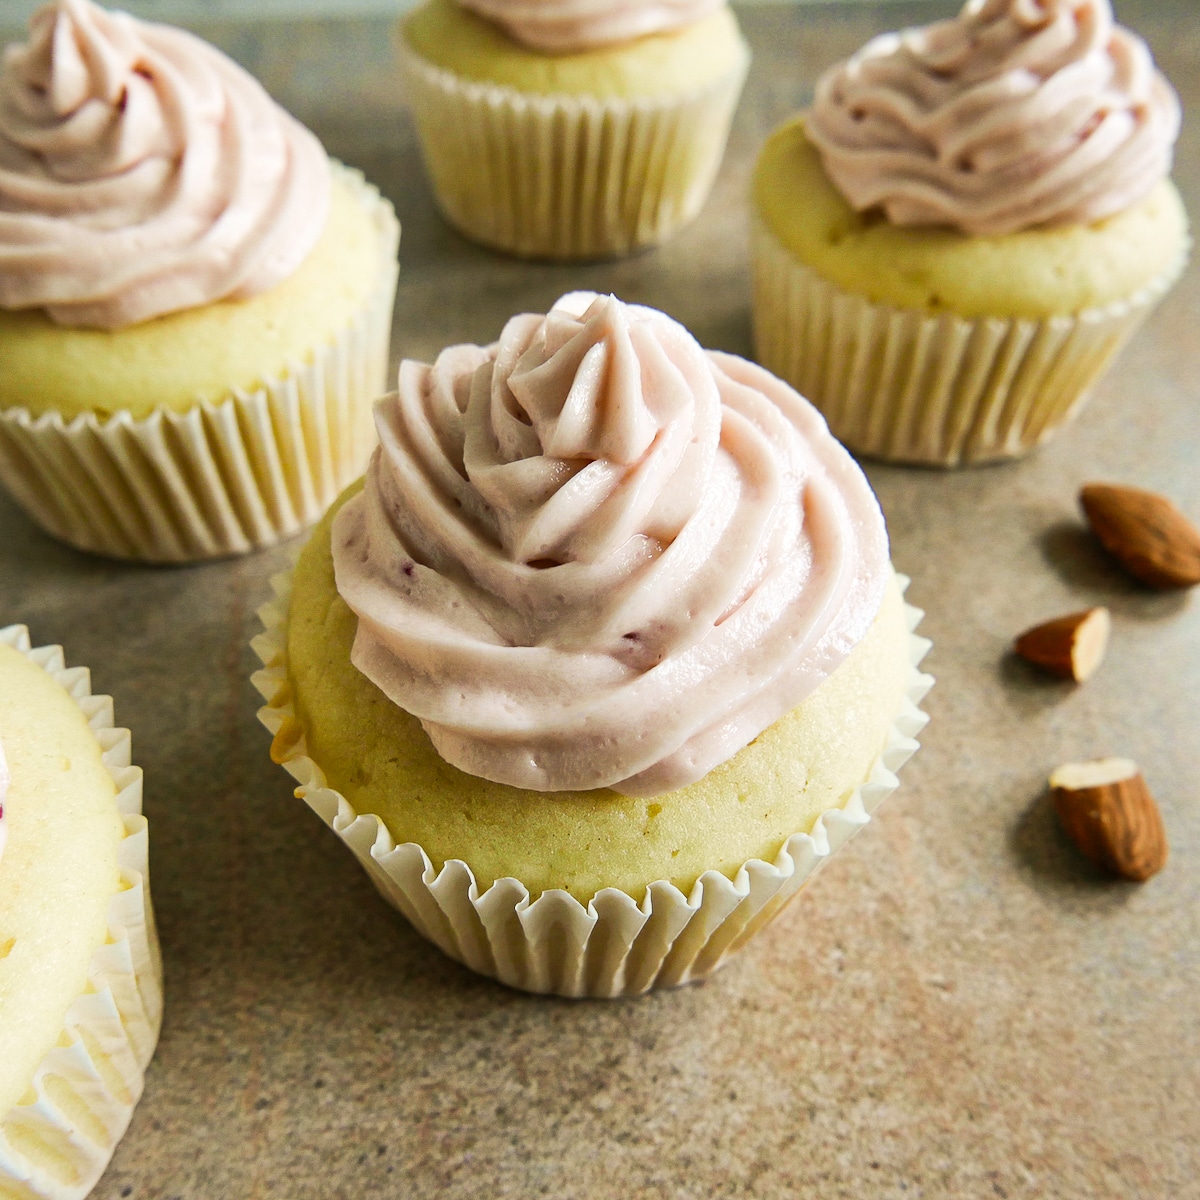 almond cupcakes arranged on a table with toasted almonds.